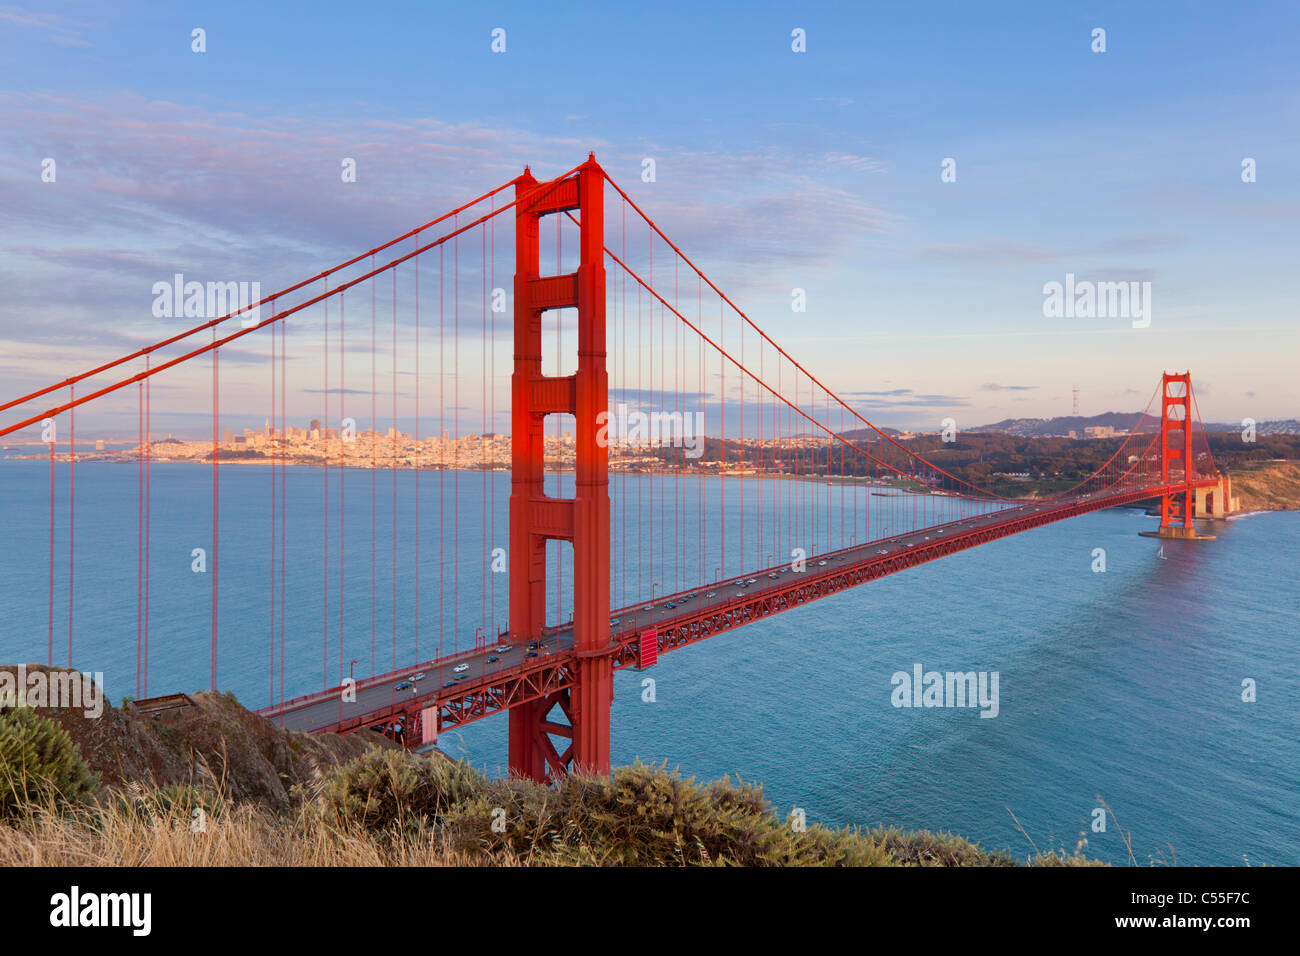 San Francisco Golden Gate Bridge with traffic crossing the bridge to and from Marin County City of San Francisco California Stock Photo